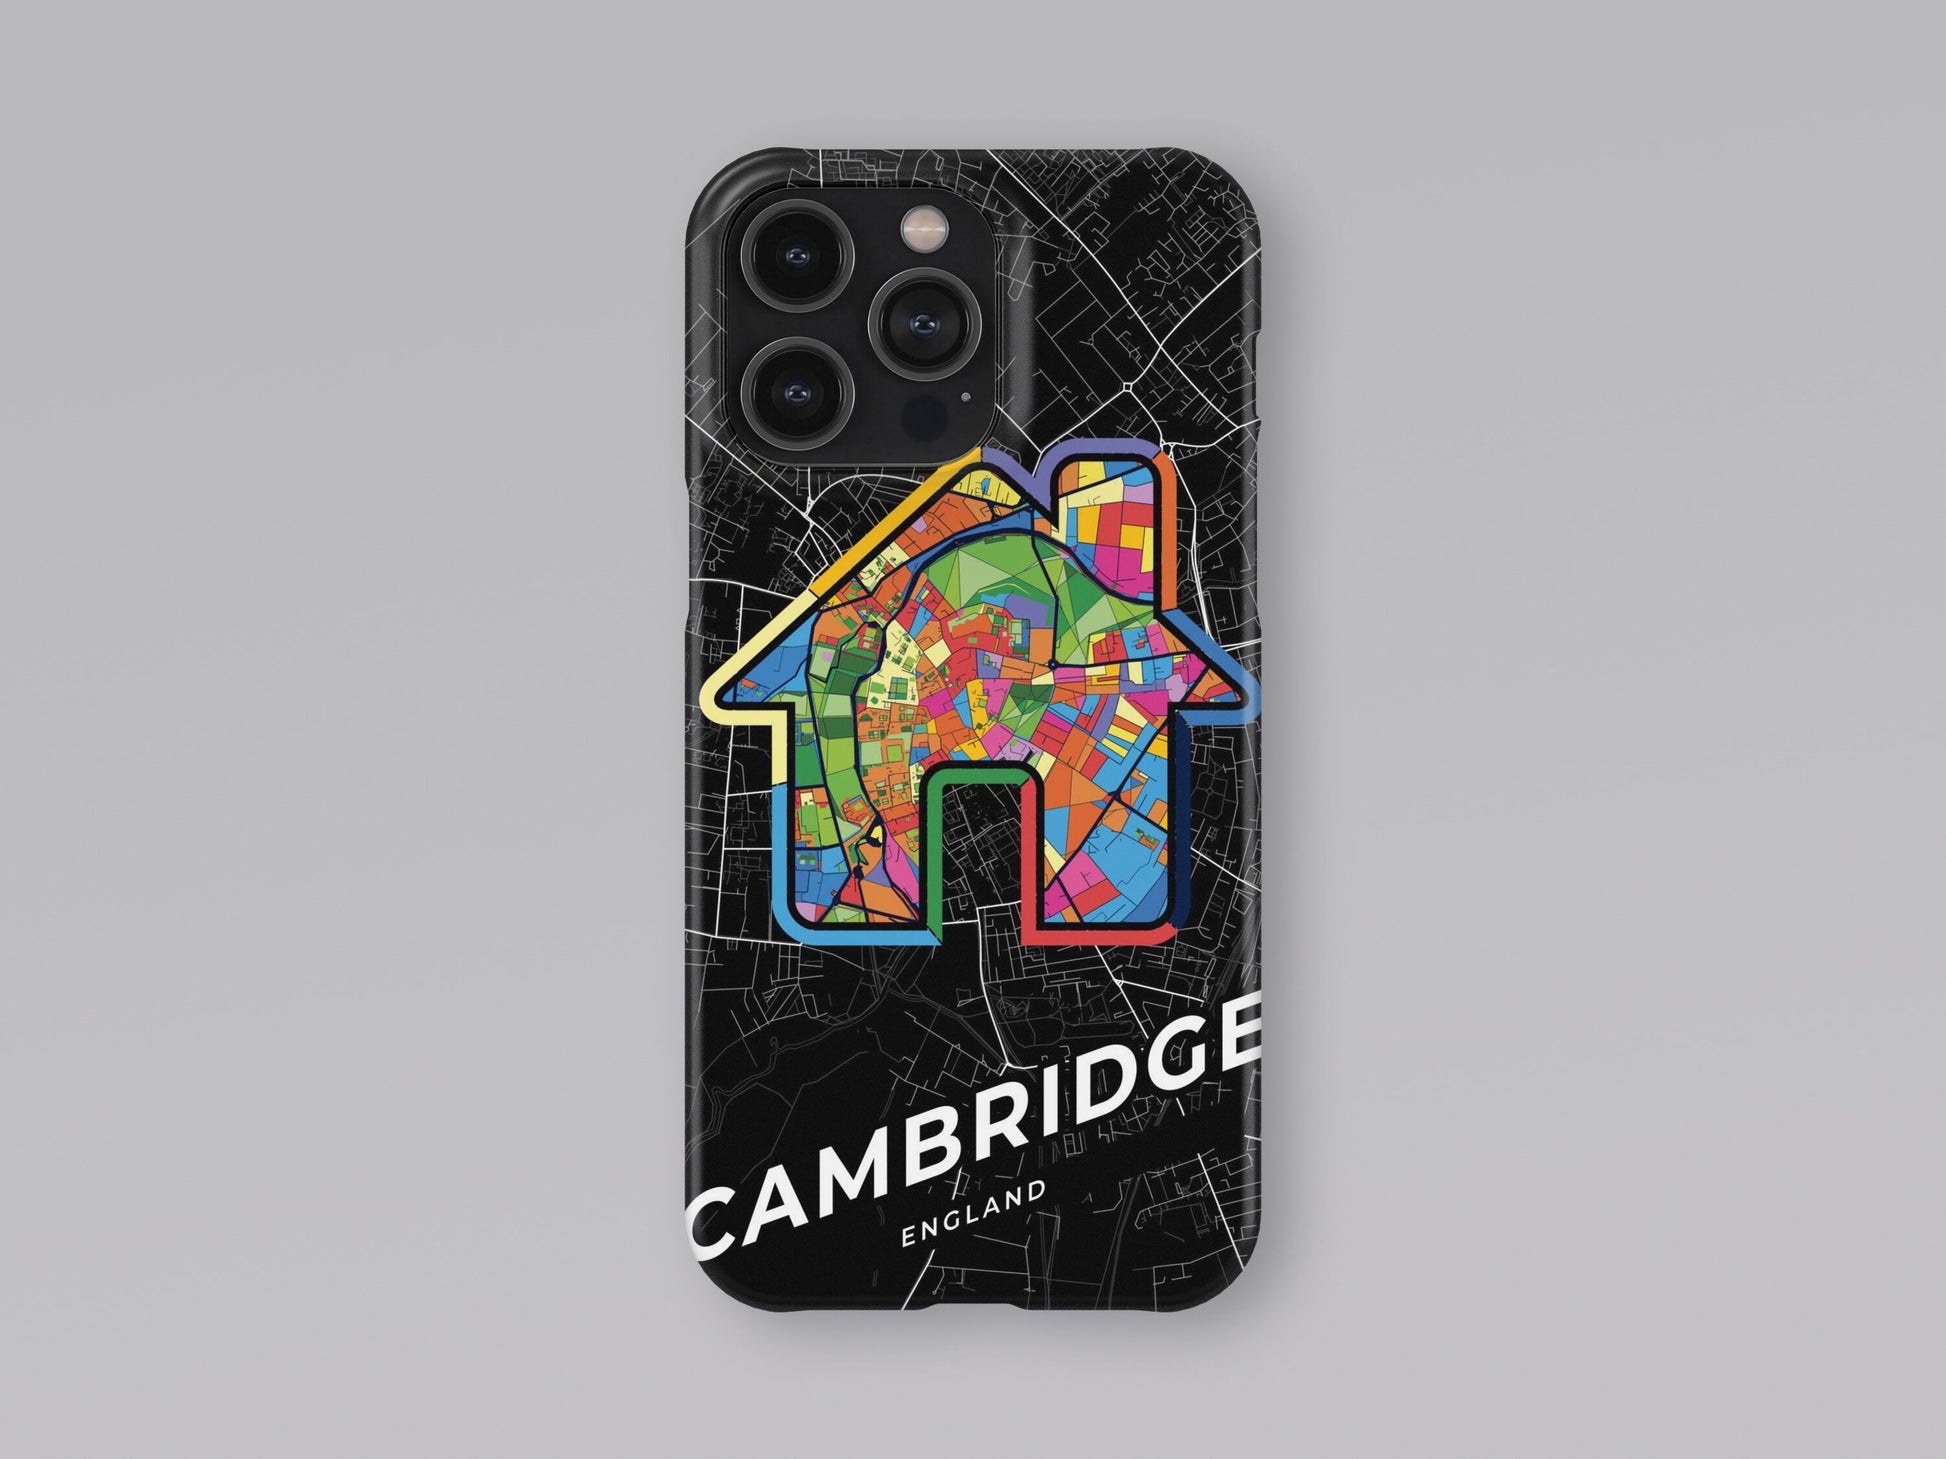 Cambridge England slim phone case with colorful icon. Birthday, wedding or housewarming gift. Couple match cases. 3